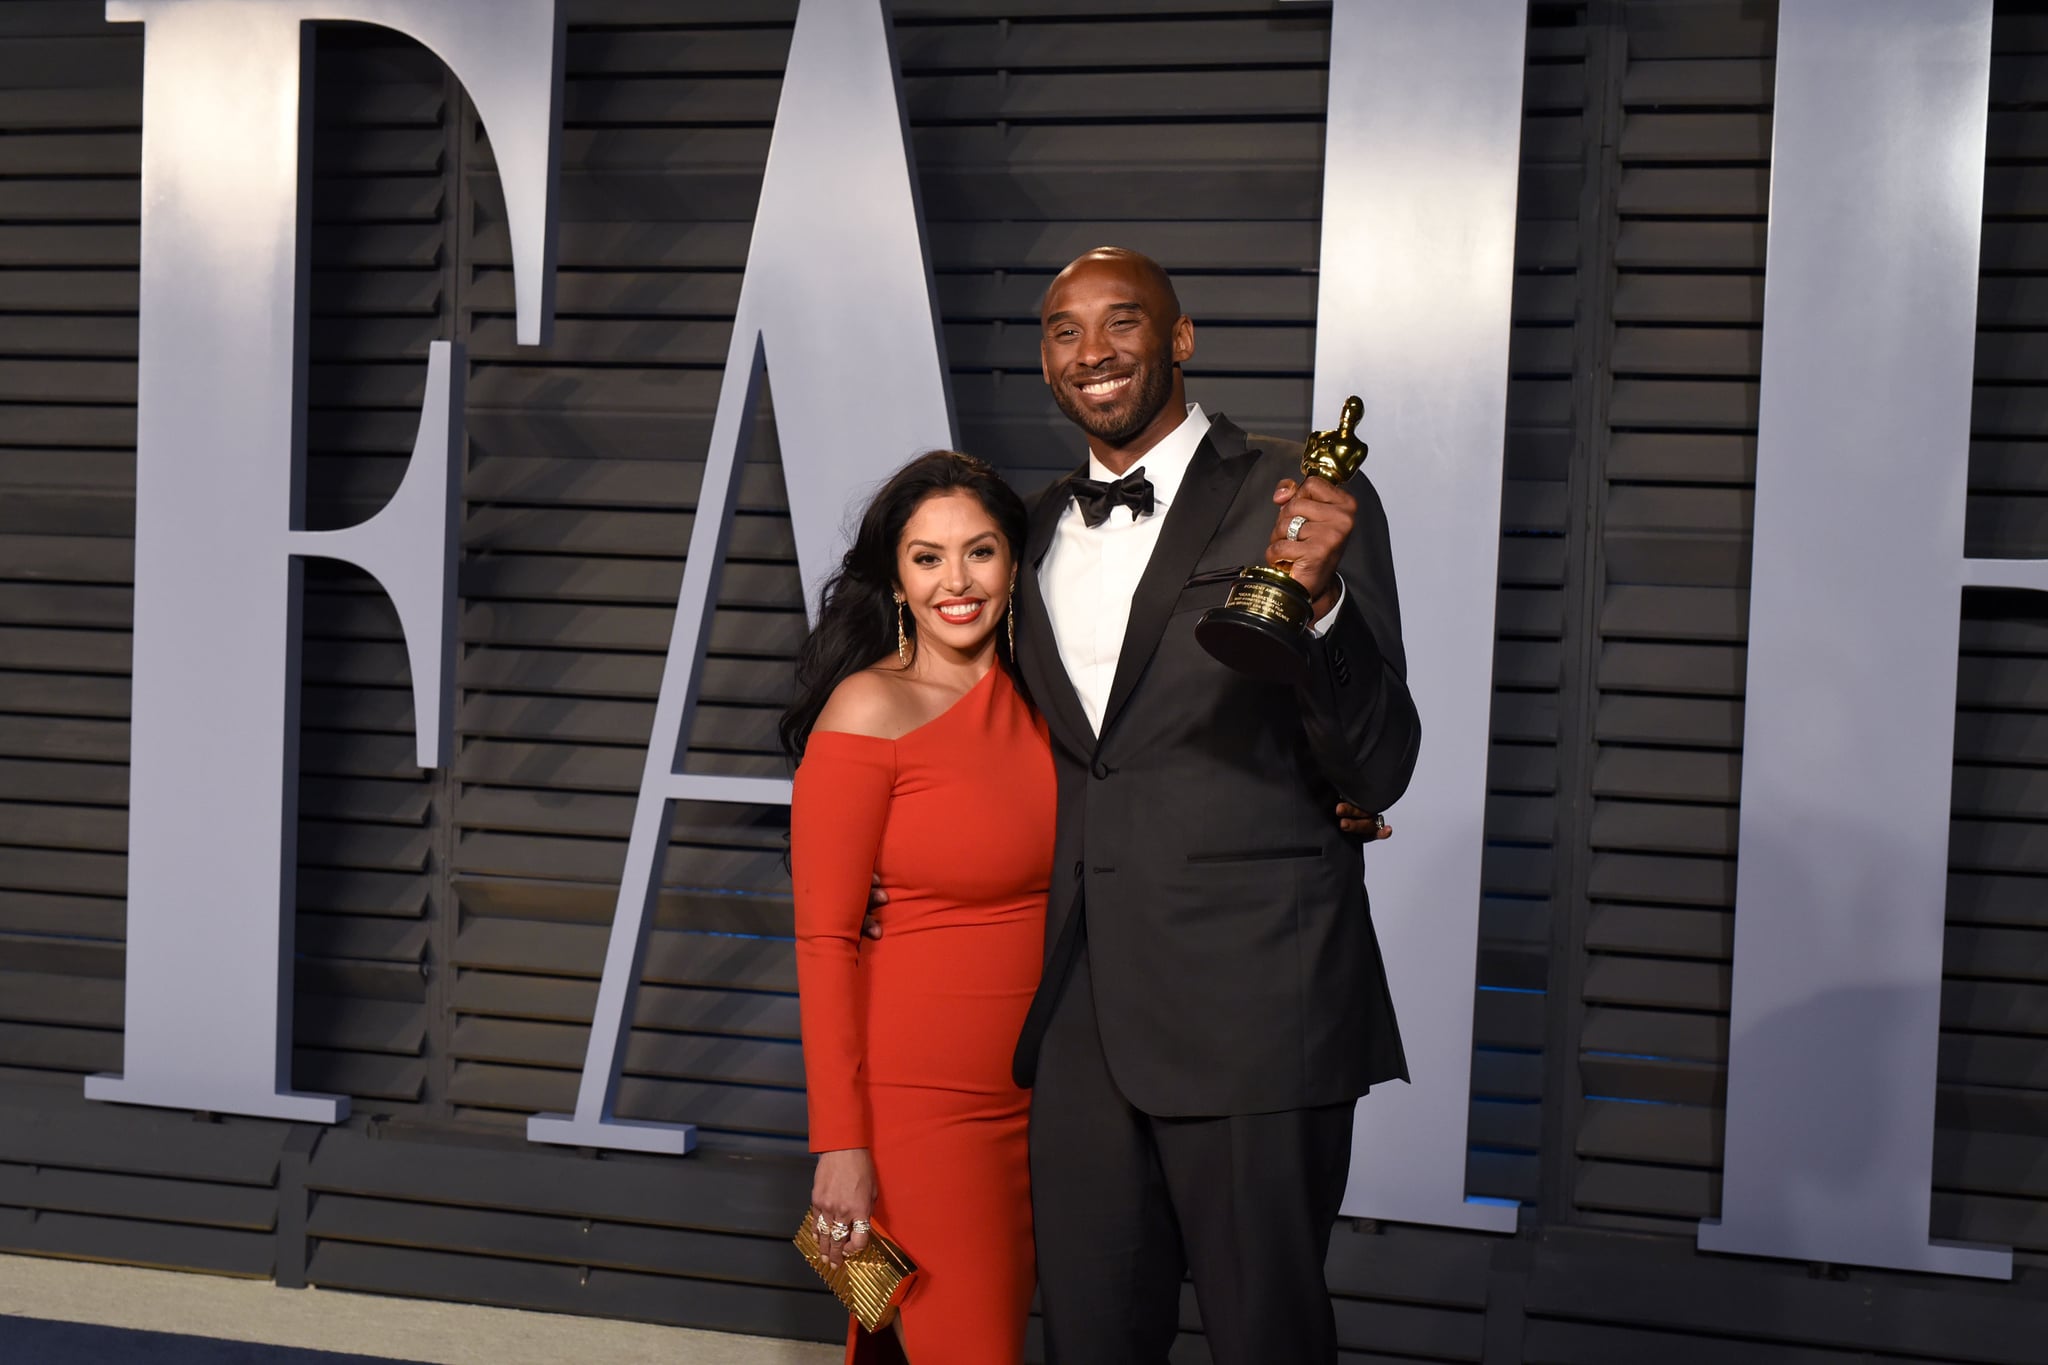 BEVERLY HILLS, CA - MARCH 4: Vanessa Bryant and Kobe Bryant attend 2018 Vanity Fair Oscar Party Hosted By Radhika Jones - Arrivals at Wallis Annenberg Centre for the Performing Arts on March 4, 2018 in Beverly Hills, CA. (Photo by Presley Ann/Patrick McMullan via Getty Images) *** Local Caption *** Vanessa Bryant;Kobe Bryant